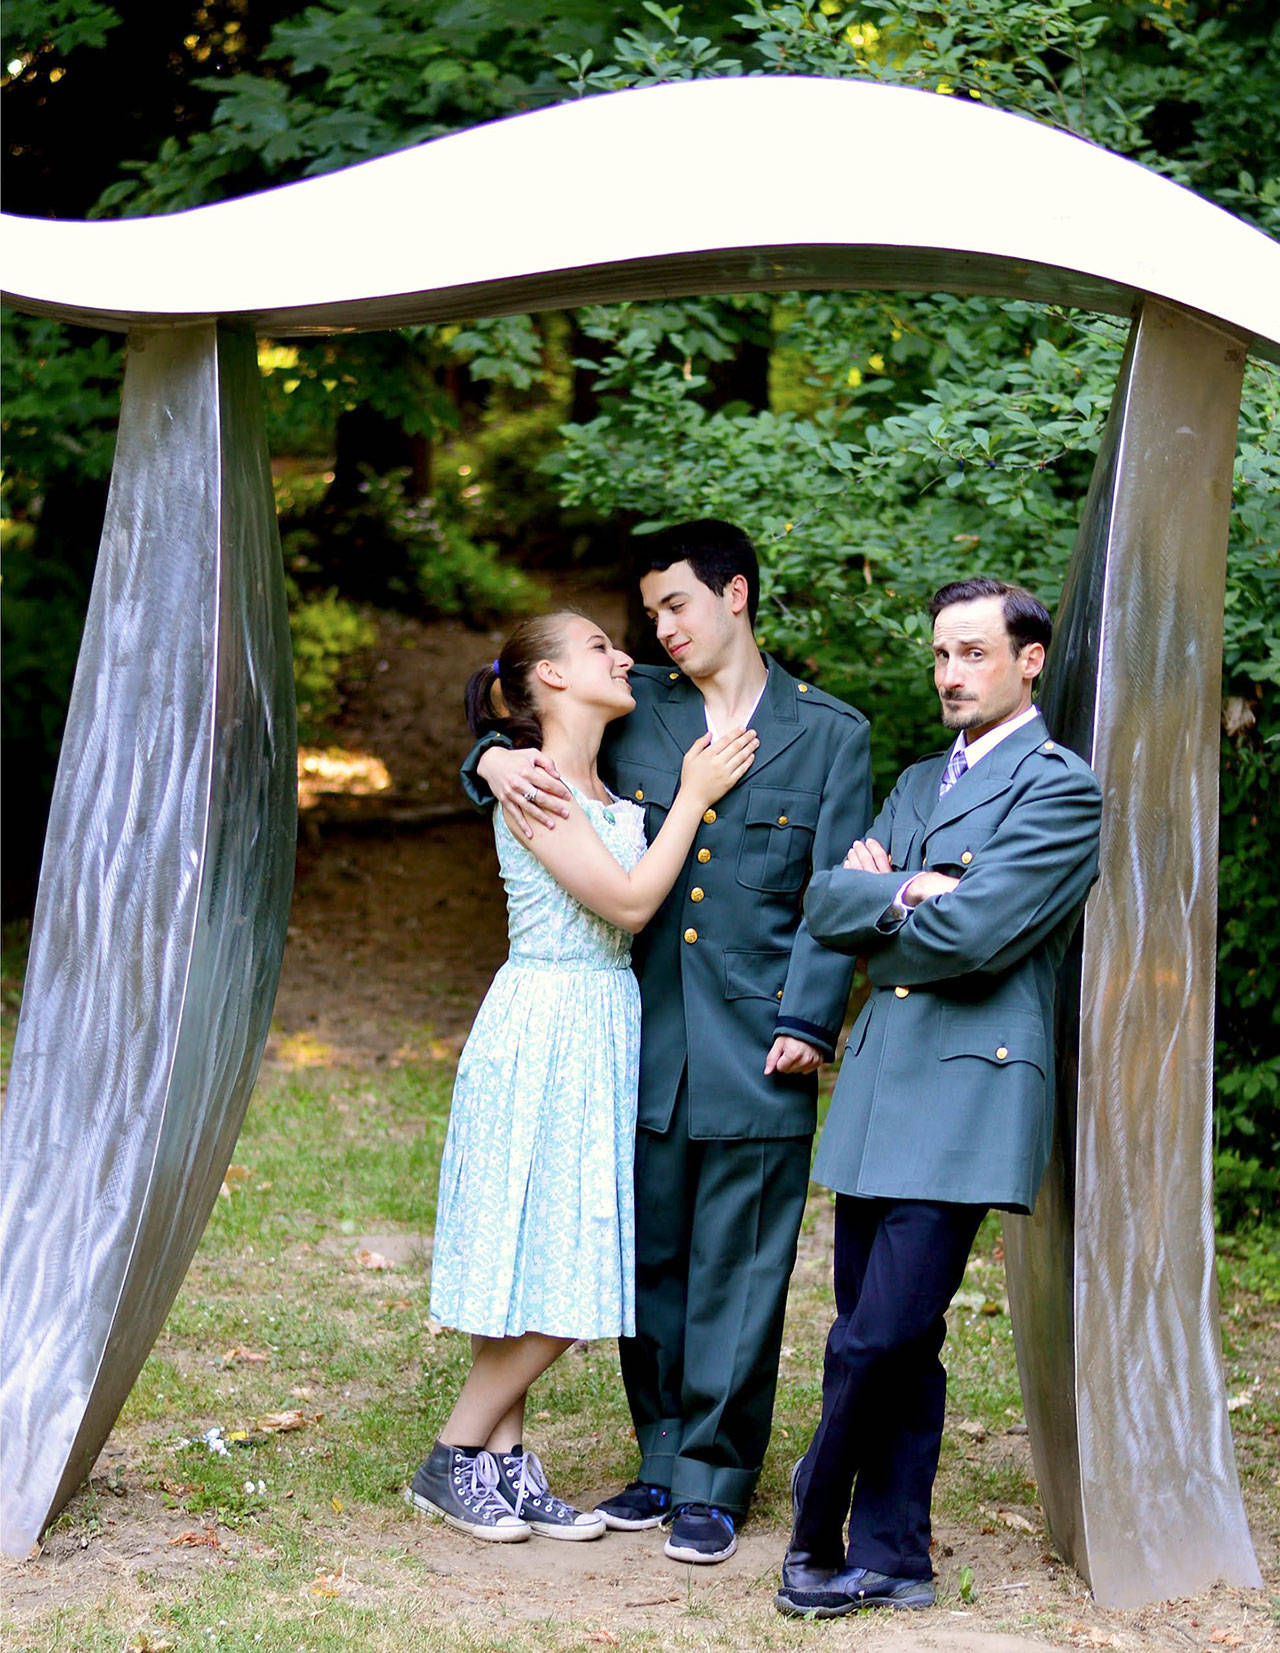 From left, Samantha Weinert, Brad Alemao and Josh Sutcliffe appear, along with the Webster’s Woods “Pi a la Mode” sculpture, in “Much Ado about Nothing.” The Shakespeare in the Woods romantic comedy plays in the woods at the Port Angeles Fine Arts Center each weekend beginning today through Sunday, Aug. 6. (Diane Urbani de la Paz/for Peninsula Daily News)